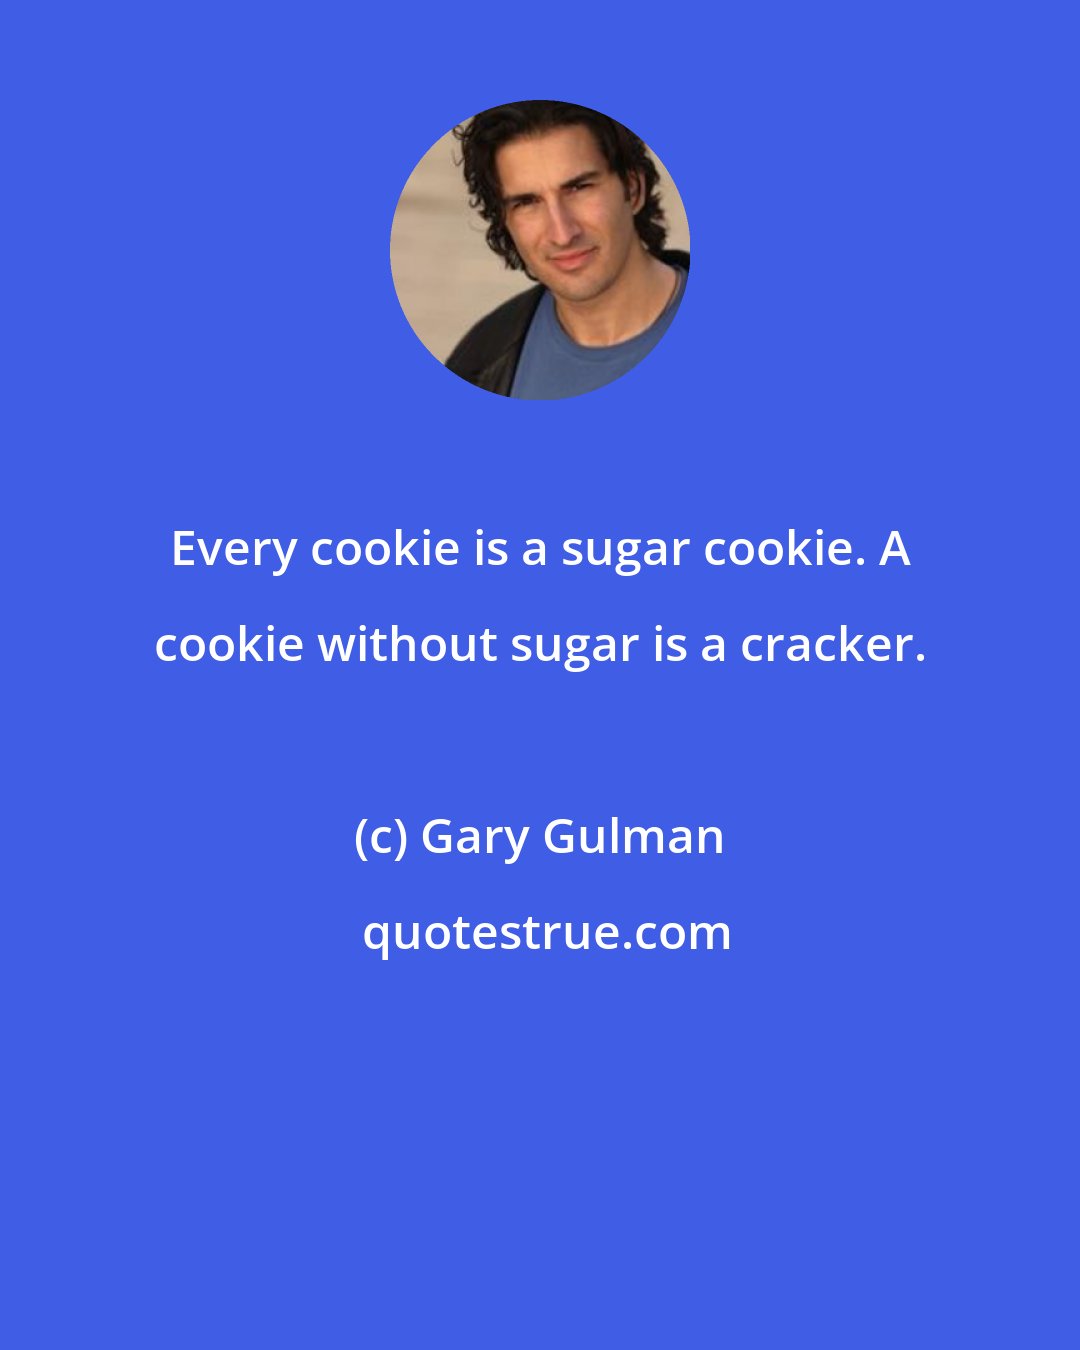 Gary Gulman: Every cookie is a sugar cookie. A cookie without sugar is a cracker.